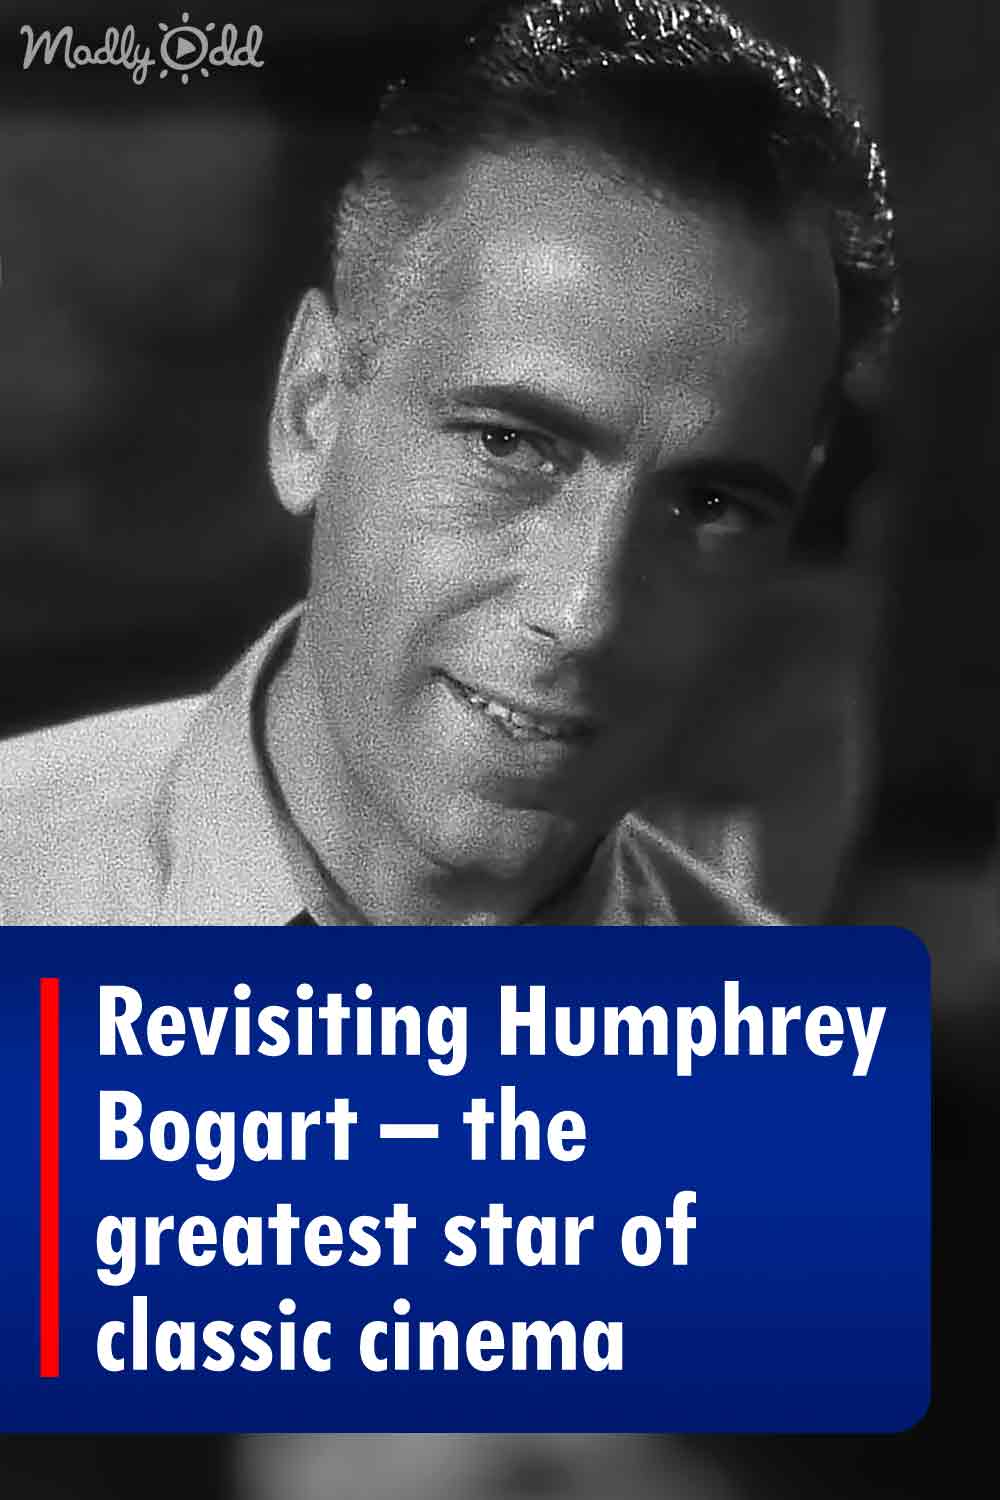 Revisiting Humphrey Bogart – the greatest star of classic cinema